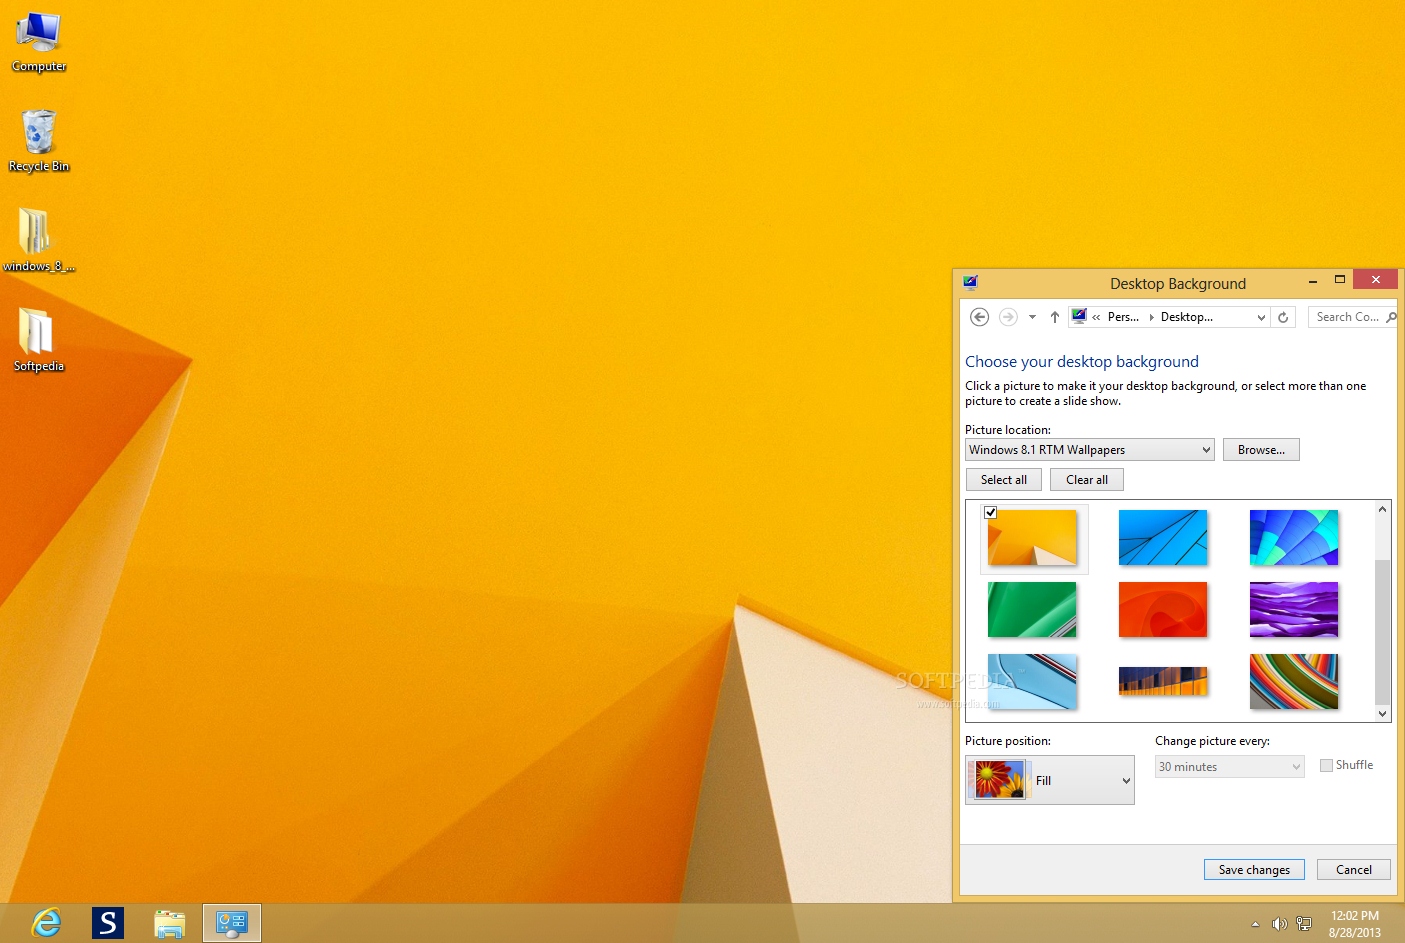 Windows Rtm Wallpaper Users Can Explore All The Desktop